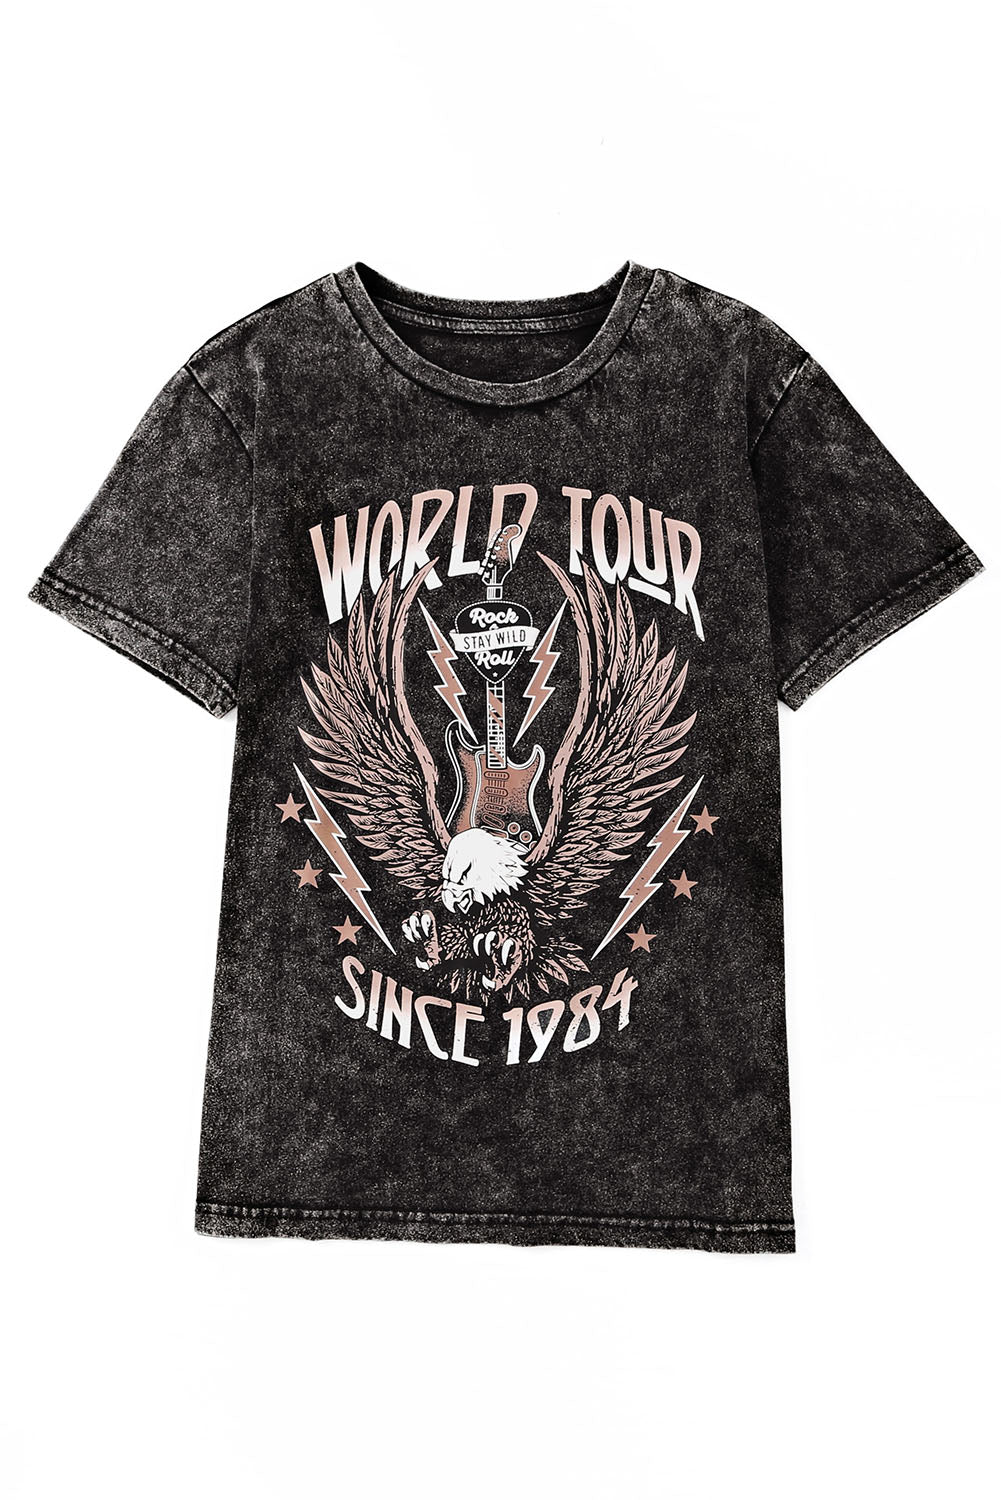 Gray WORLD TOUR Graphic Print Mineral Washed Tee